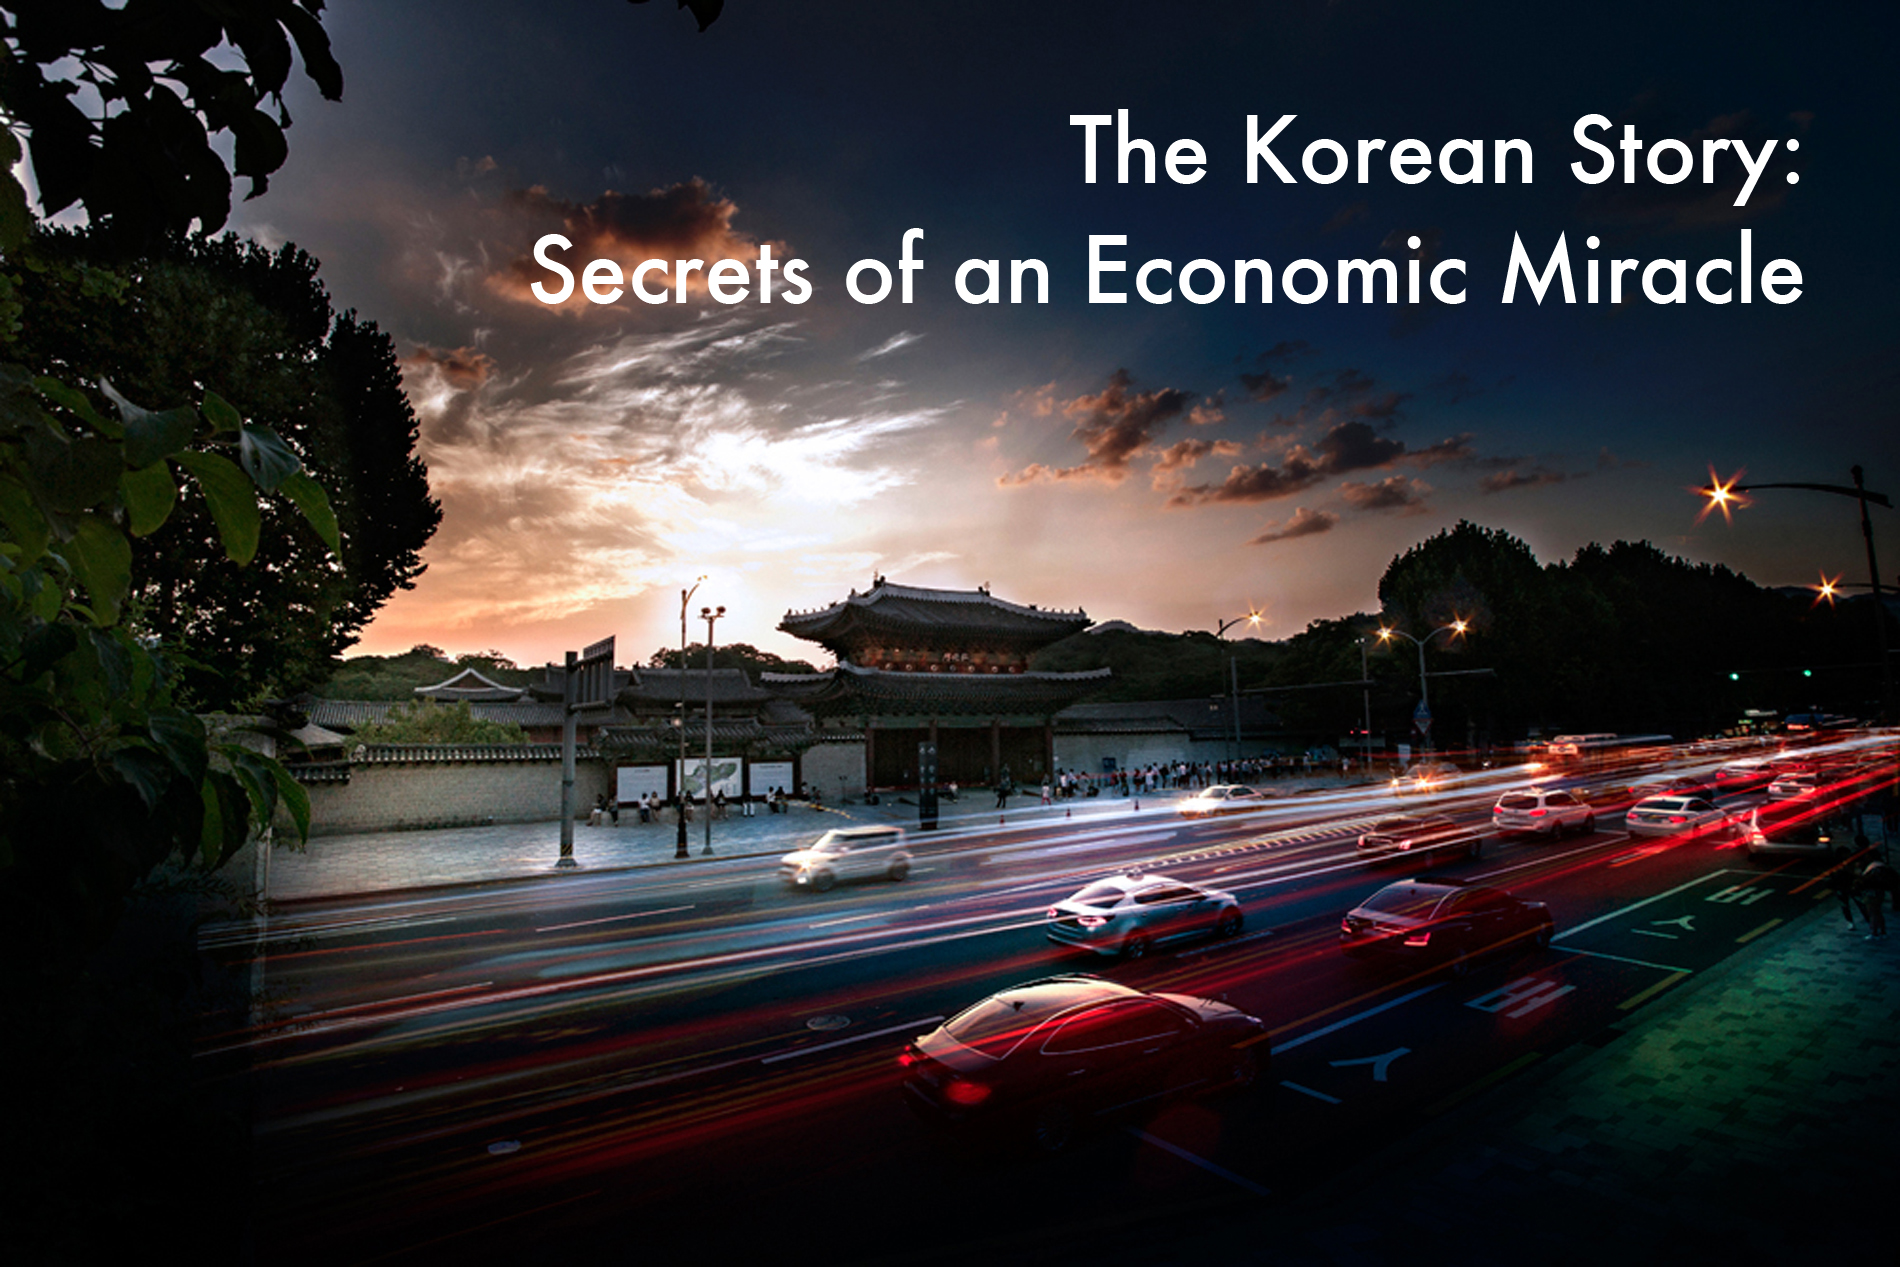 The Korean Story: Secrets of an Economic Miracle